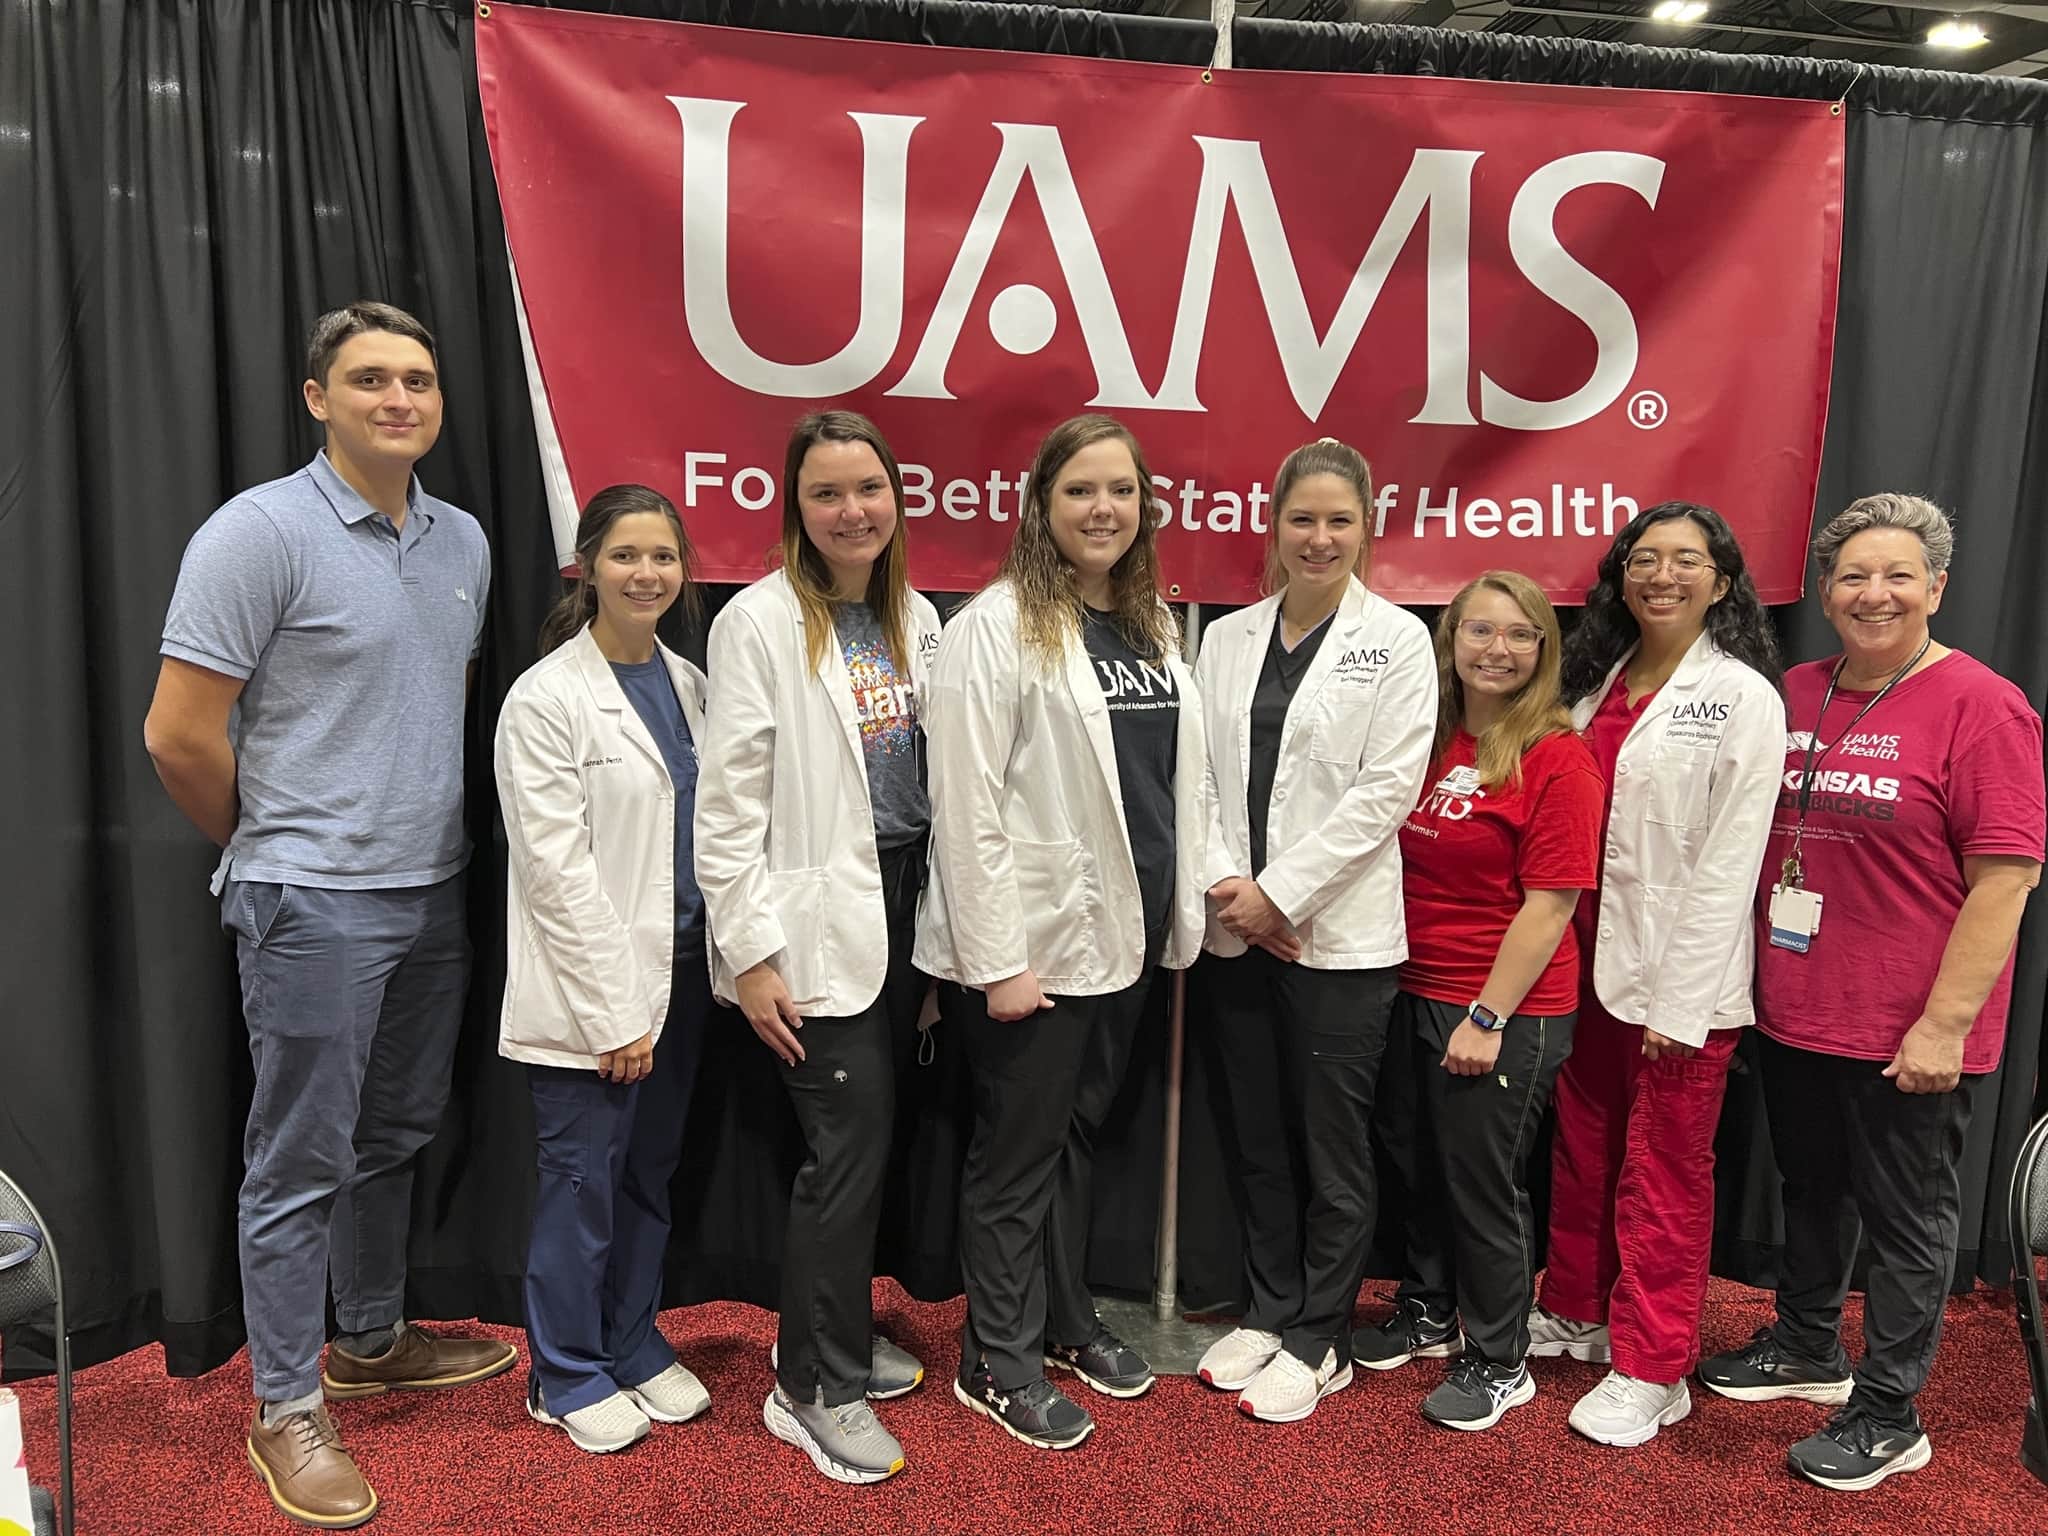 UAMS employees and students volunteered at the Health and Wellness Expo.  UAMS sponsored the event, which was featured by the Arkansas Democrat-Gazette.